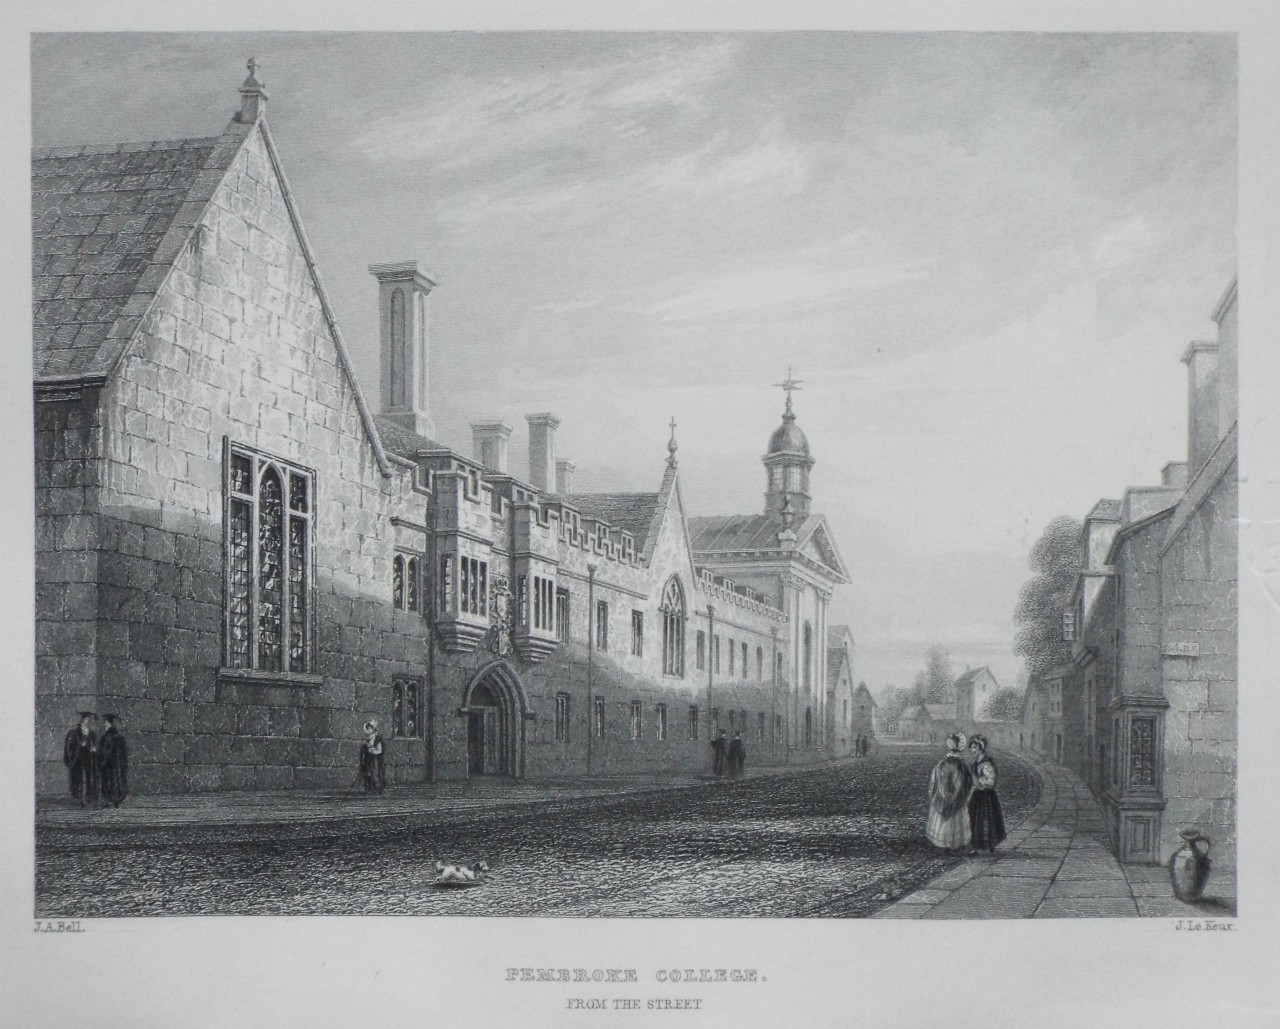 Print - Pembroke College, from the Street. - Le